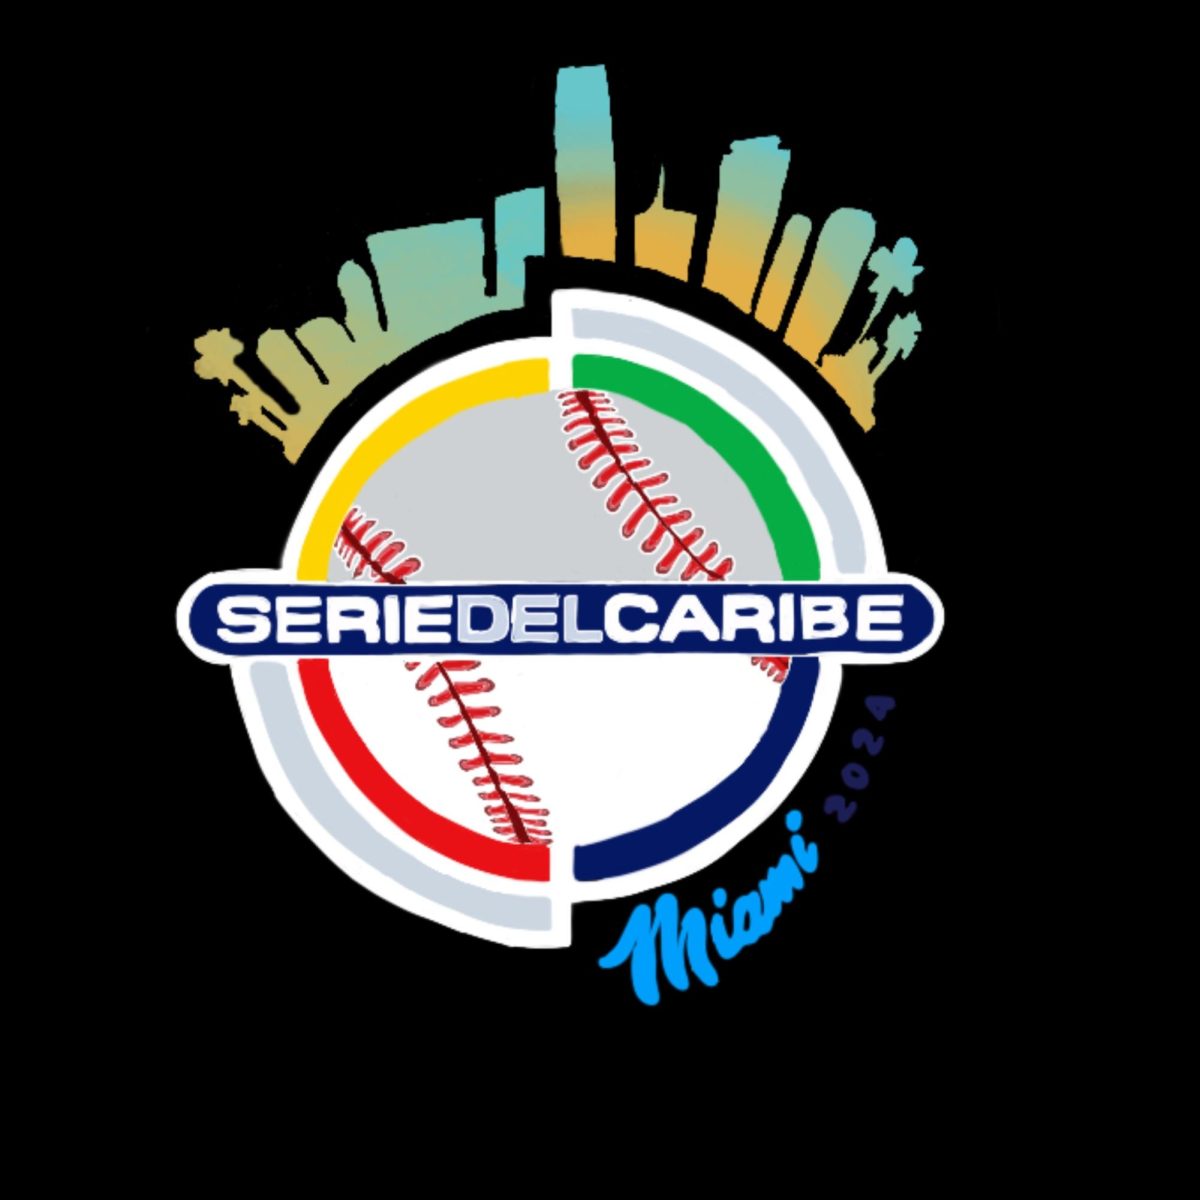 The logo for the Miami, Florida location of the Caribbean Series at LoanDepot Park on Feb. 1-9.